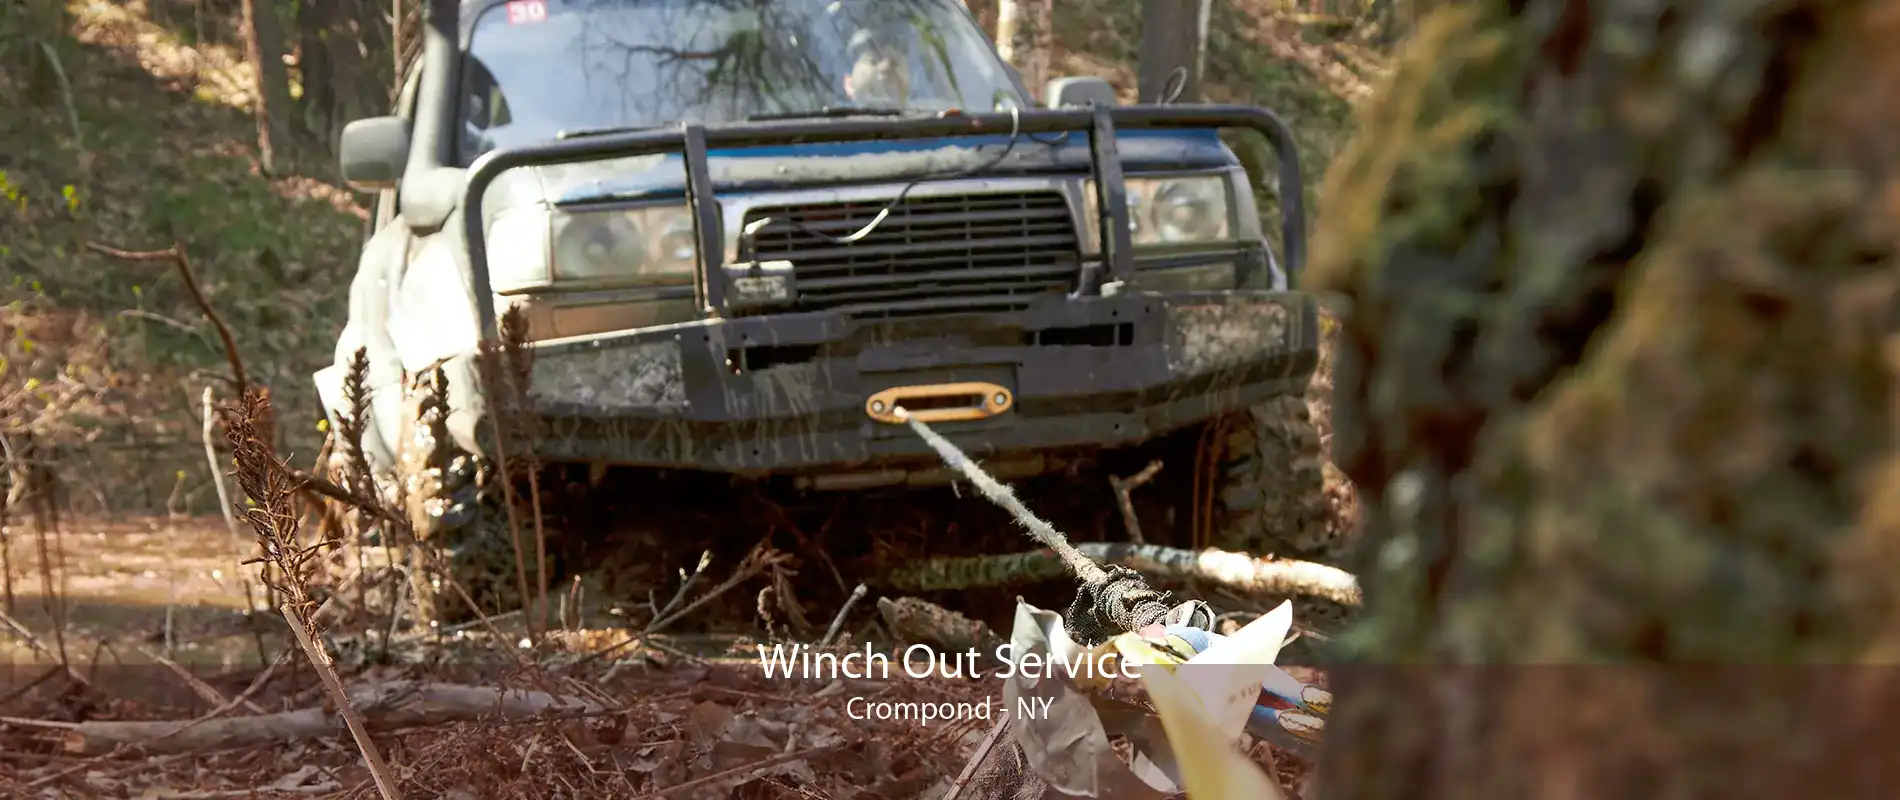 Winch Out Service Crompond - NY